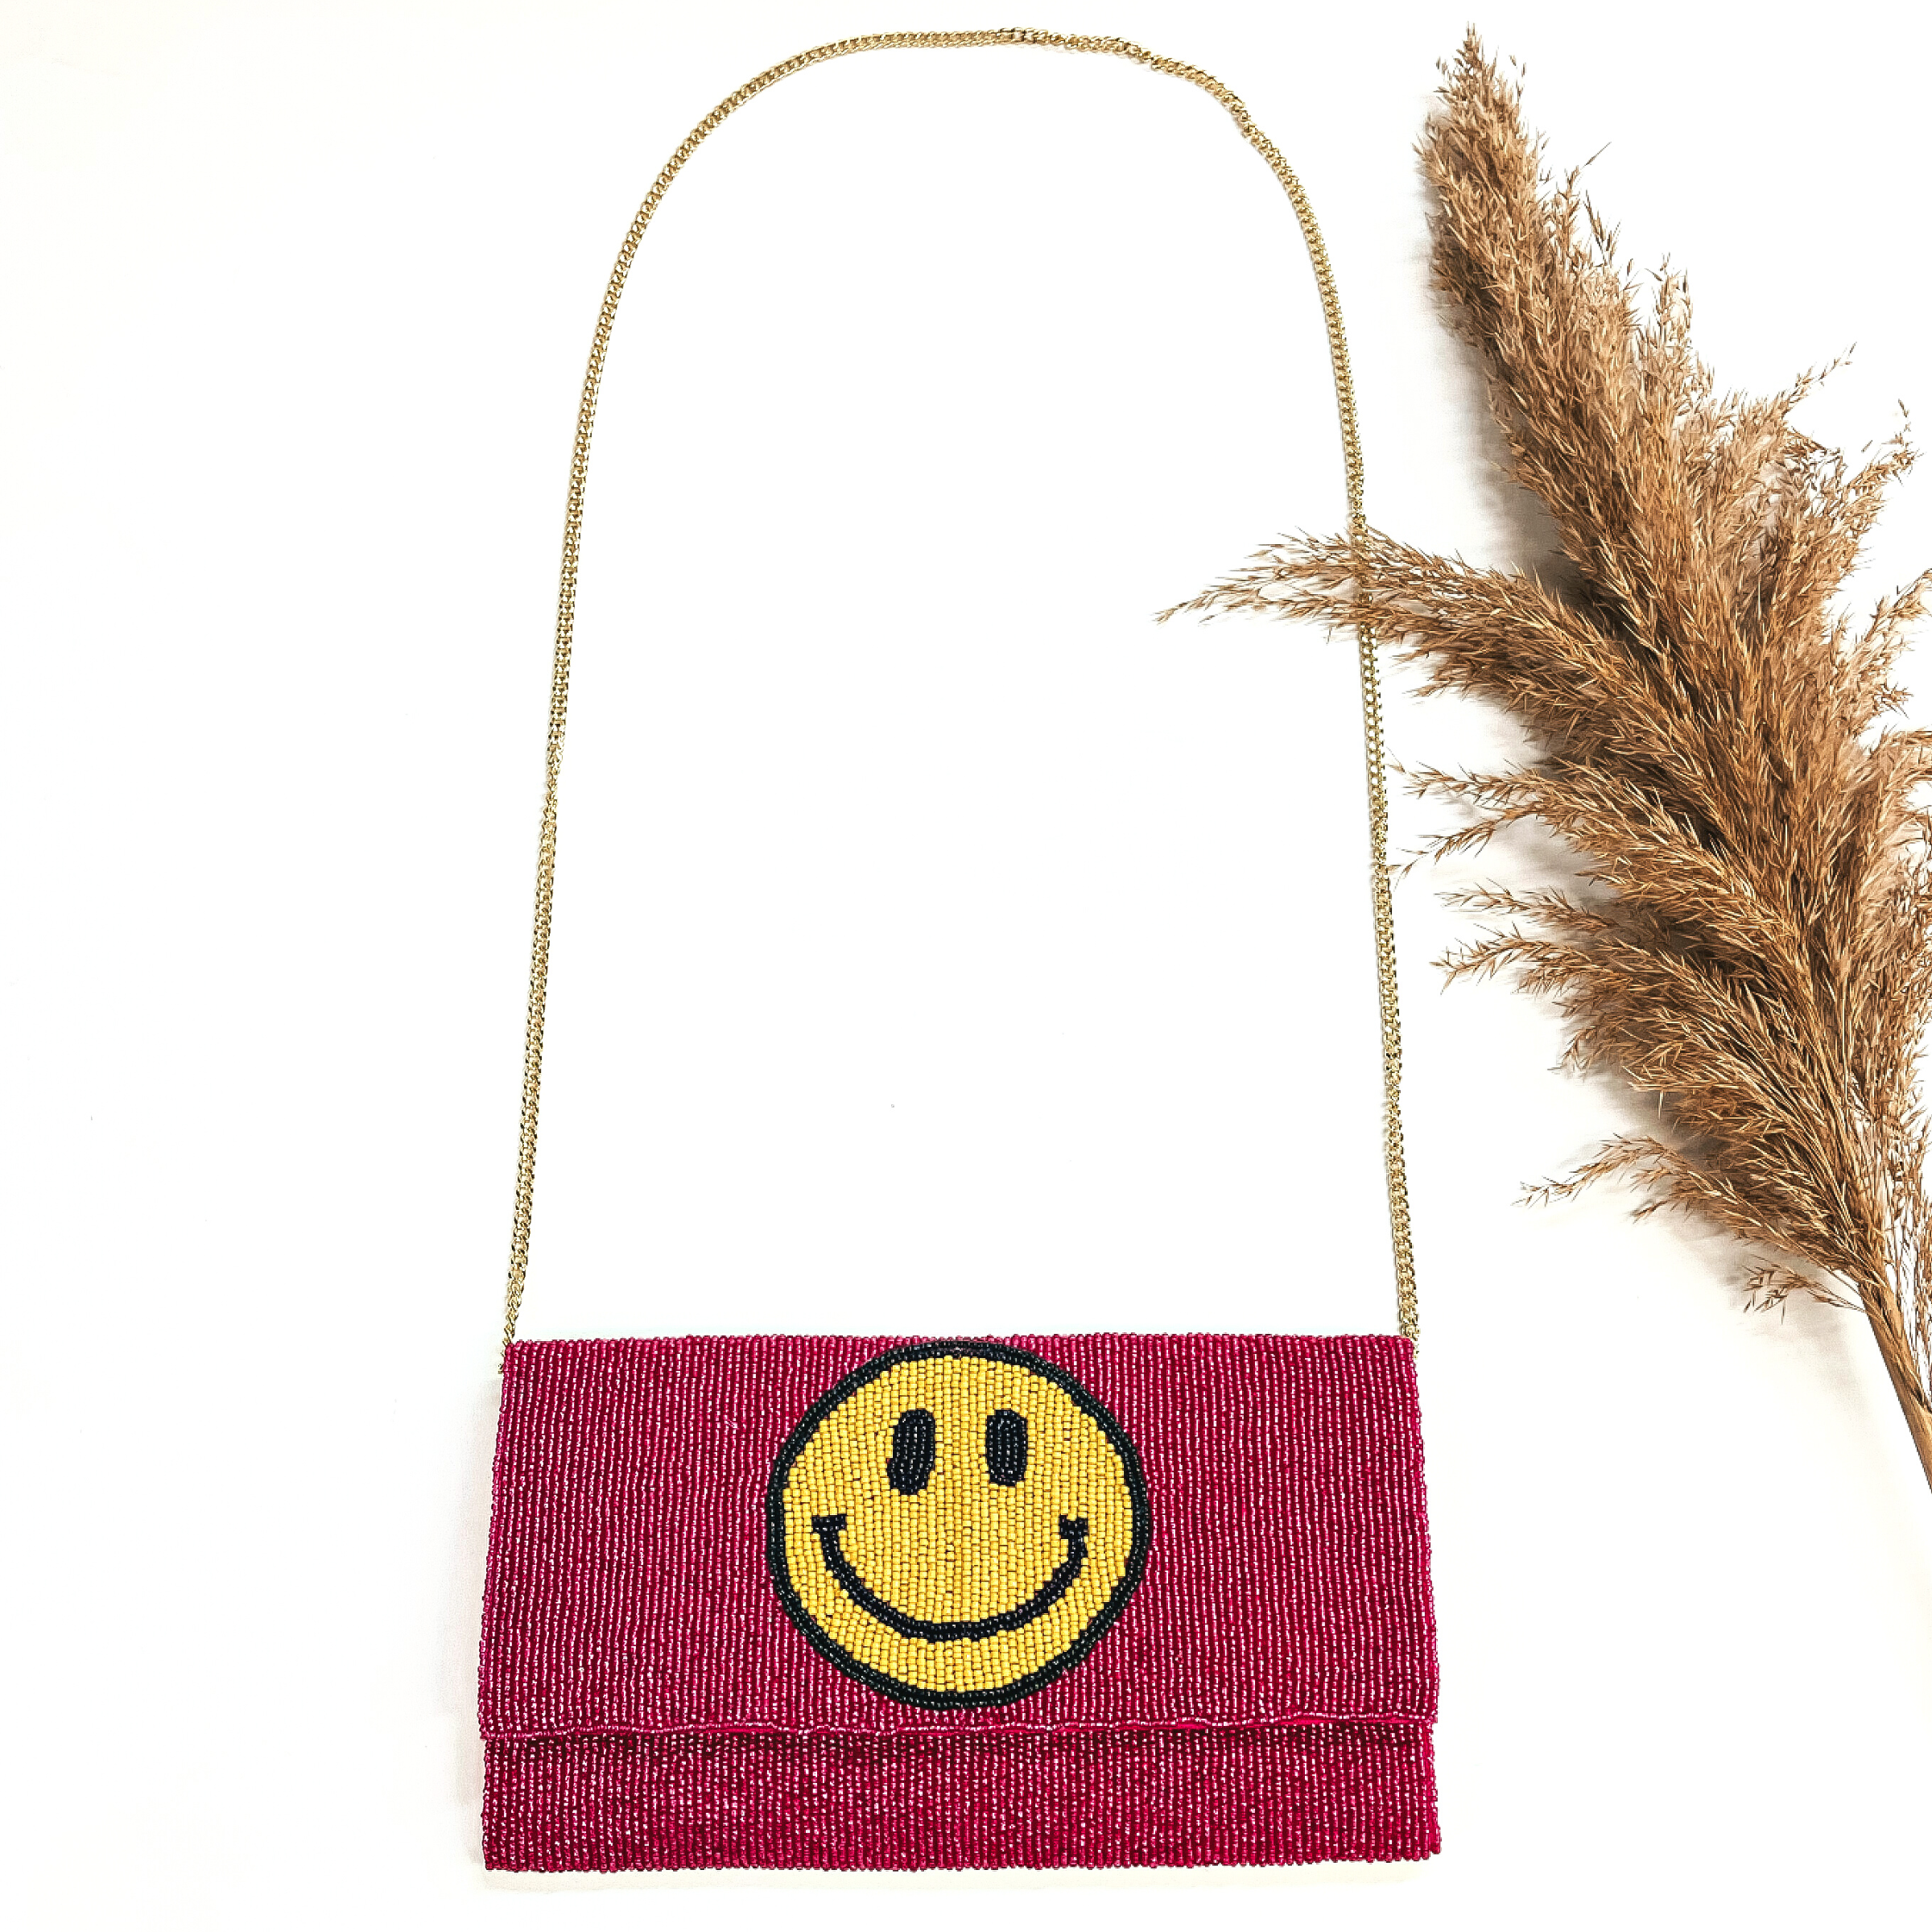 This is a seedbeaded clutch purse with a gold tone chain. This bag is in fuchsia with  a yellow happy face.This bag  is taken laying on a white background with a brown plant in the side as decor.